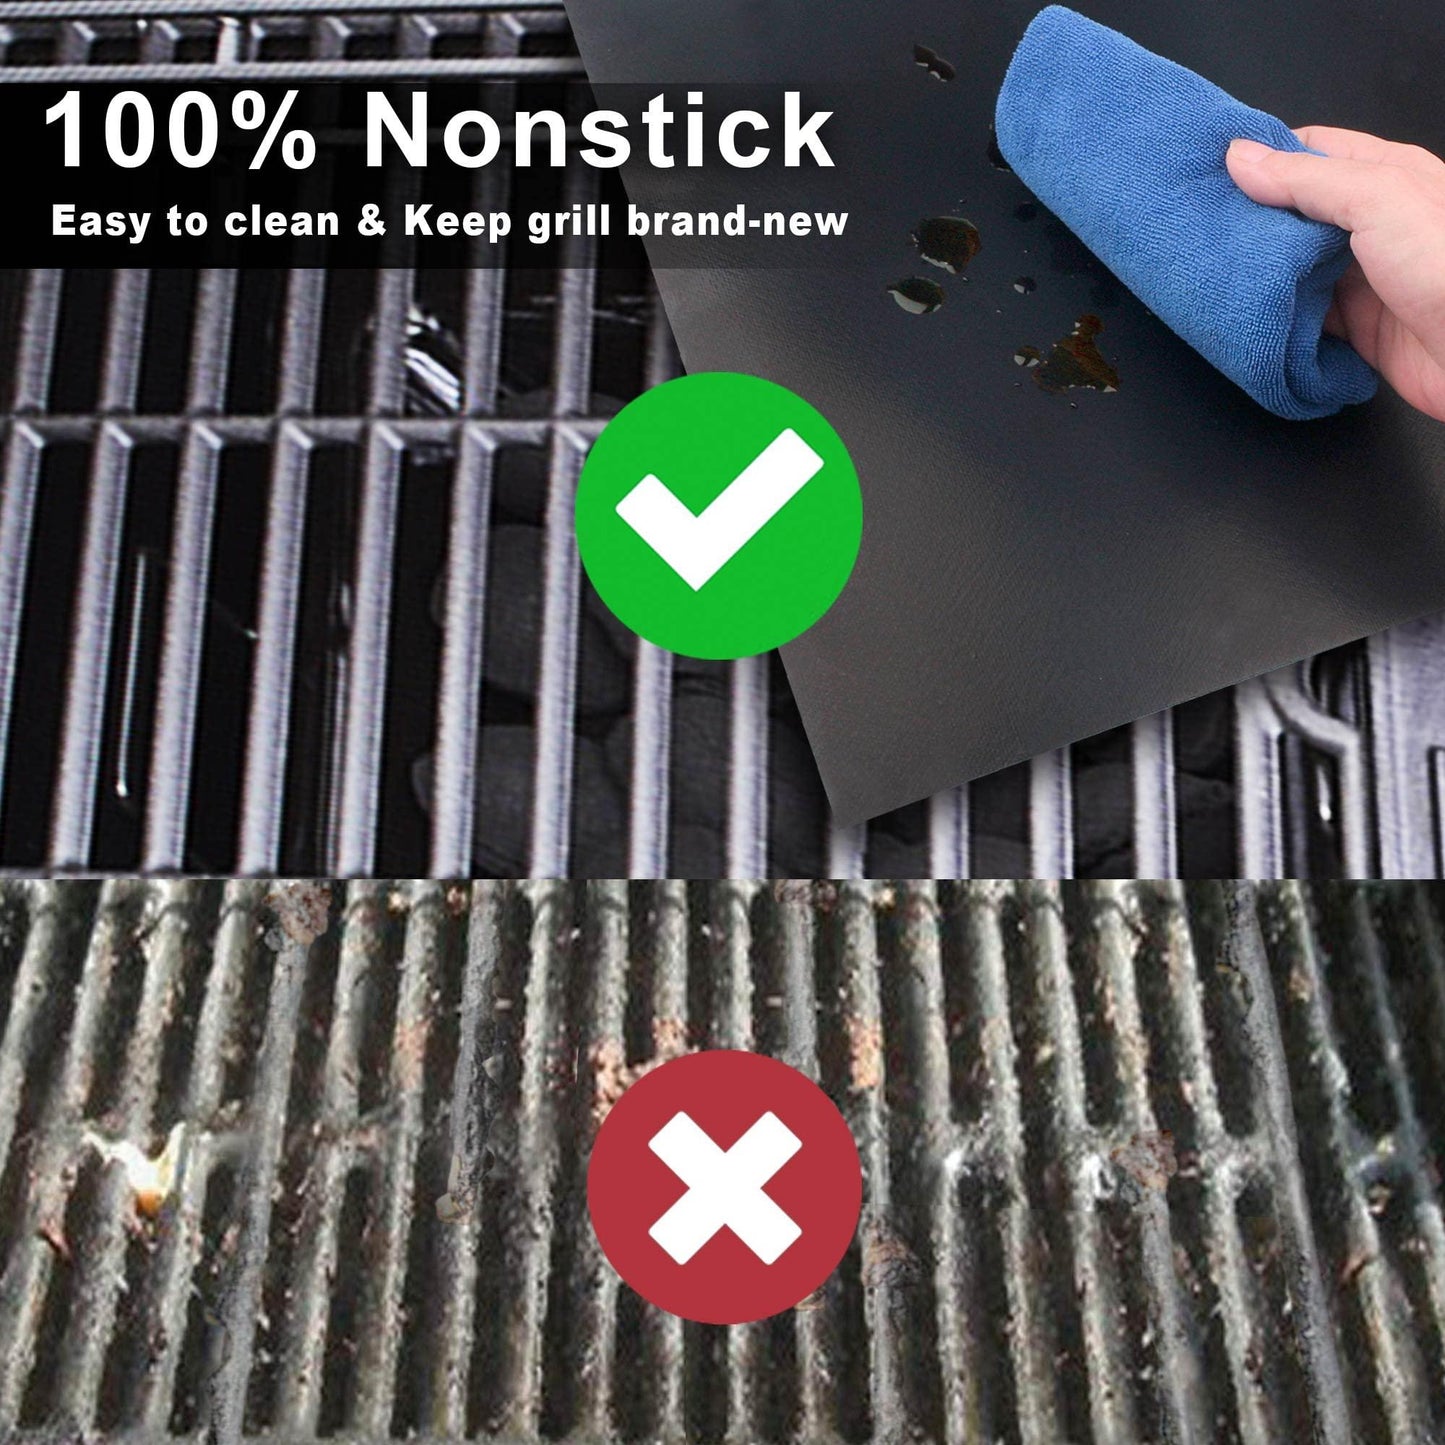 GRILLART BBQ Grill Mats for Outdoor Grill - Nonstick 600 Degree Heavy Duty Grilling Mat (Set of 2) - Reusable BBQ Grill Accessories Sheets -Works on Electric Grill Gas Charcoal BBQ - Gifts for Men Dad - CookCave